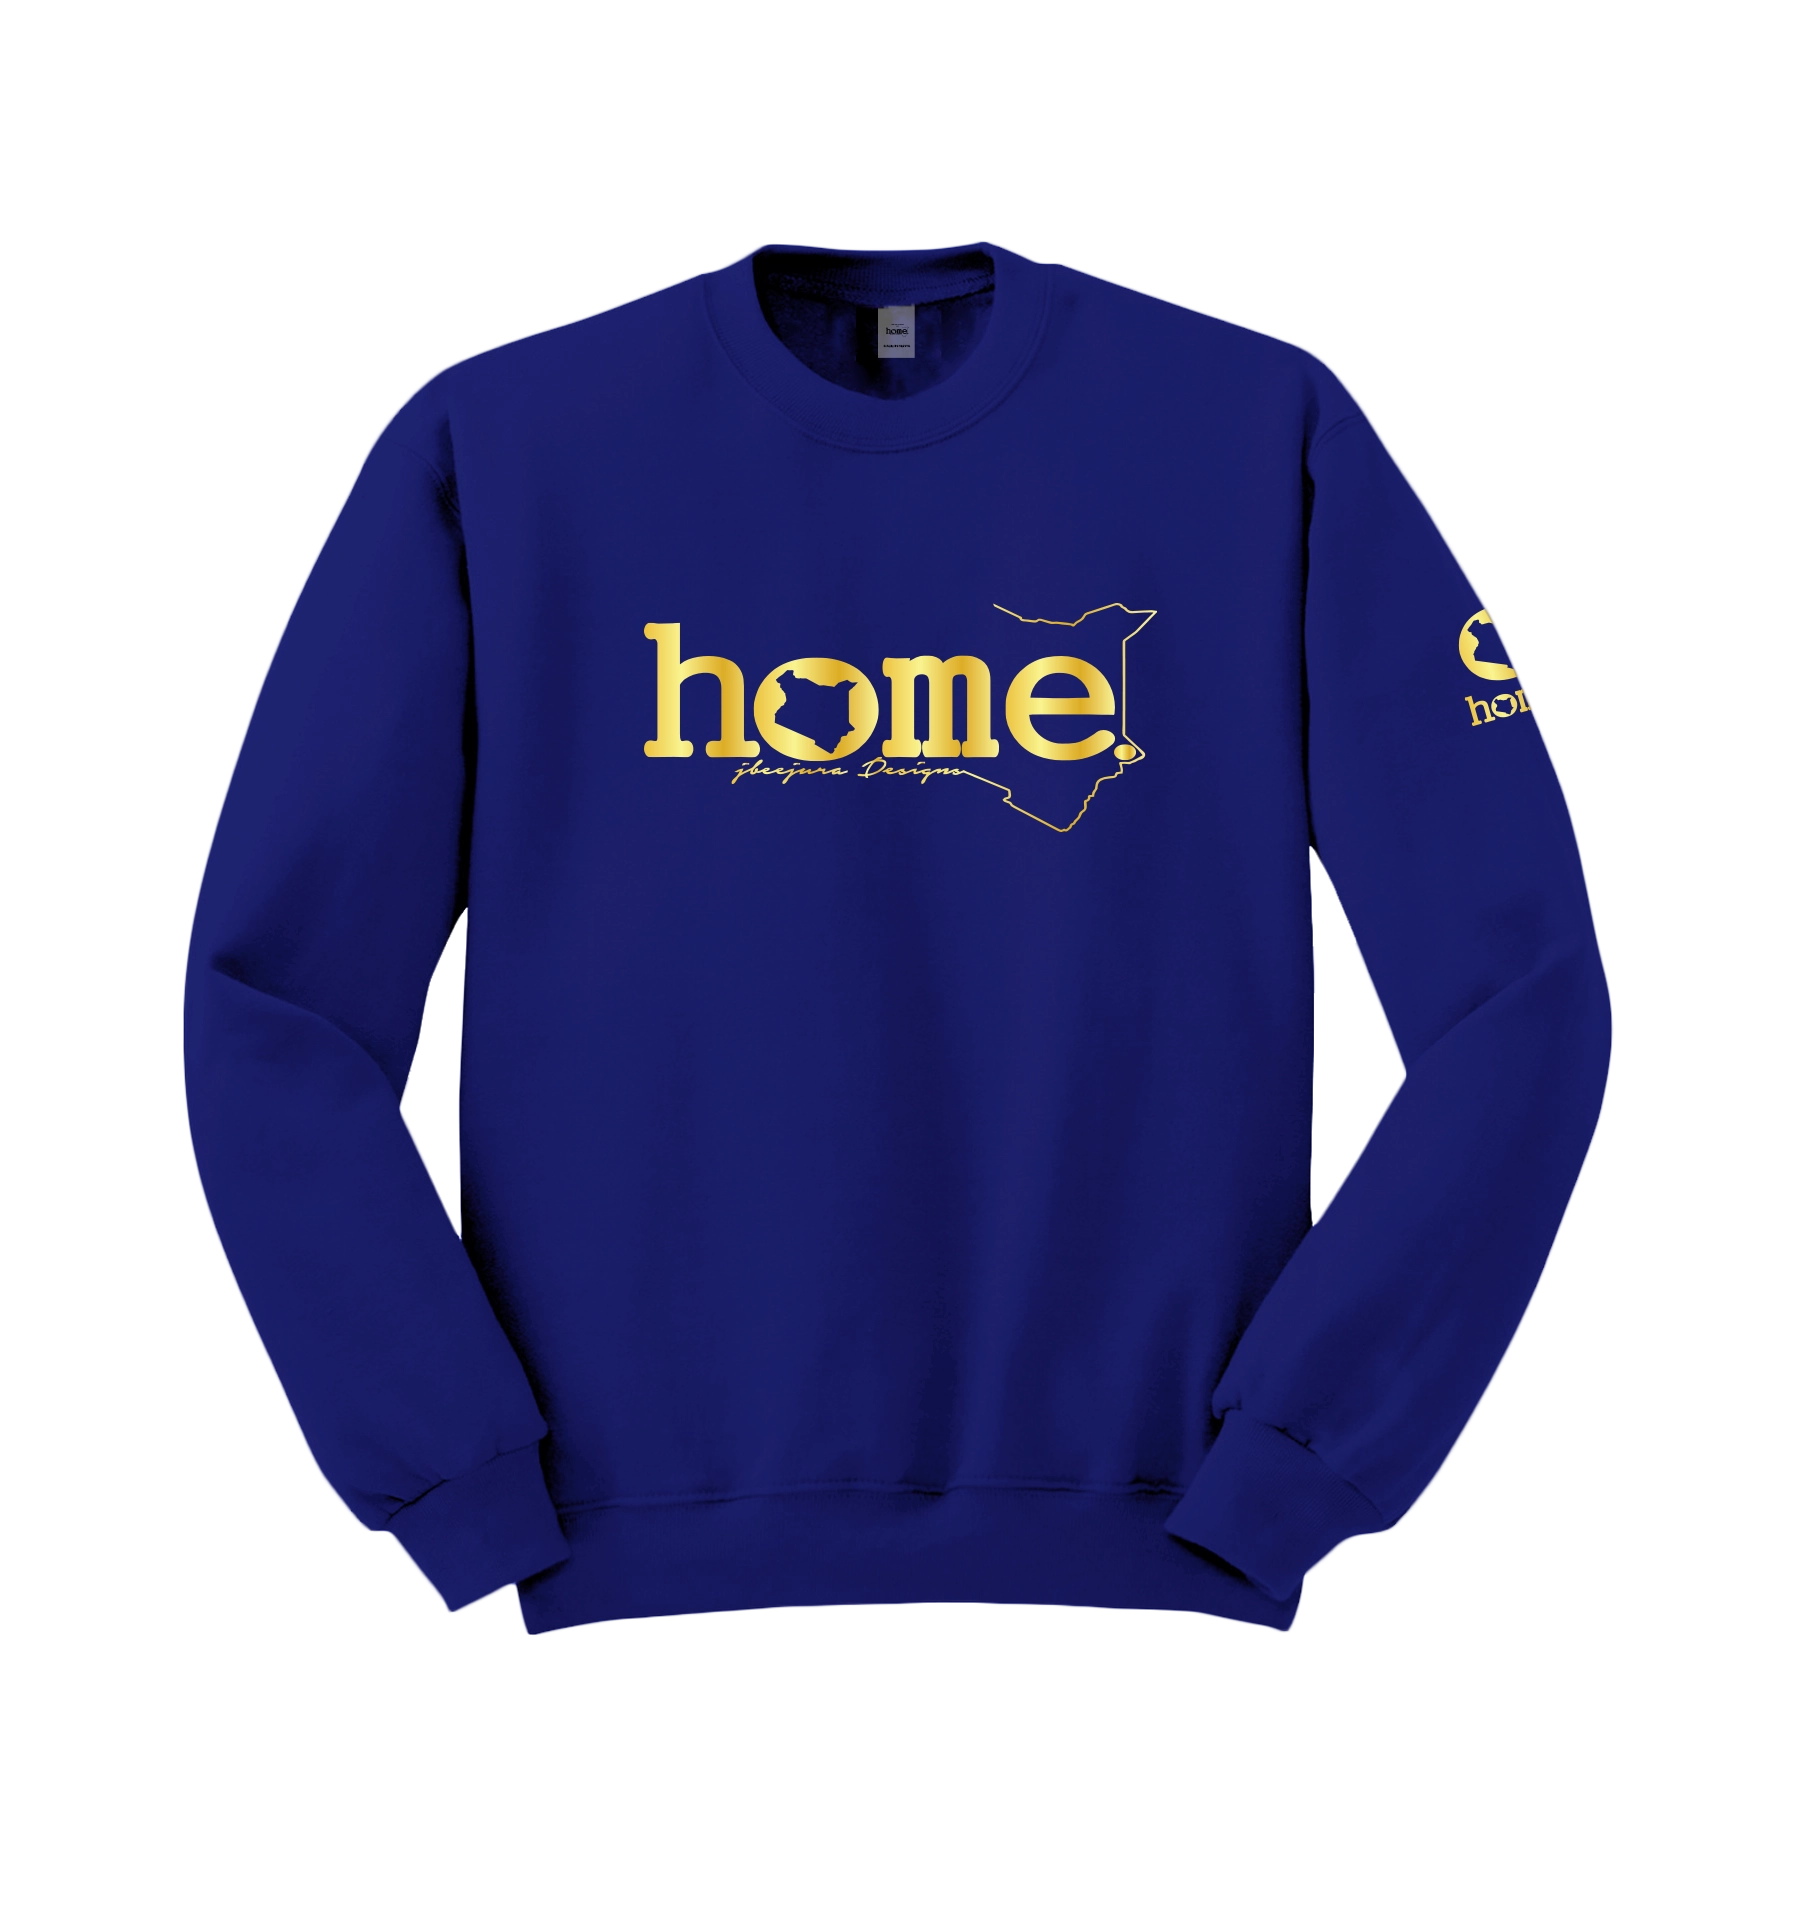 home_254 ROYAL BLUE SWEATSHIRT (HEAVY FABRIC) WITH A GOLD WORDS PRINT